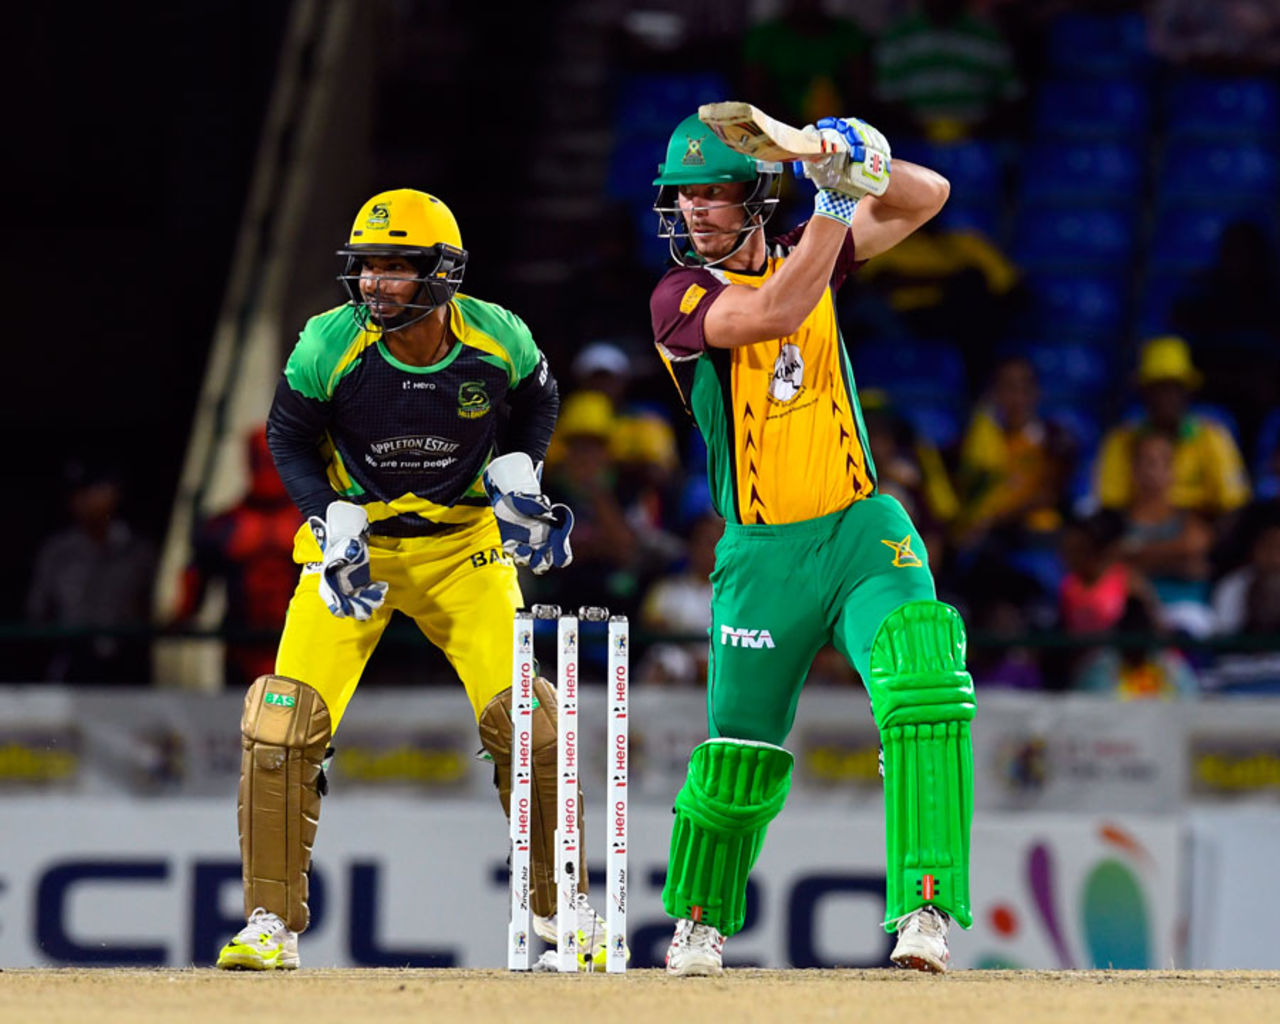 Chris Lynn punches through the covers on his way to 49, Guyana Amazon Warriors v Jamaica Tallawahs, CPL 2016, 1st playoff, St Kitts, August 3, 2016